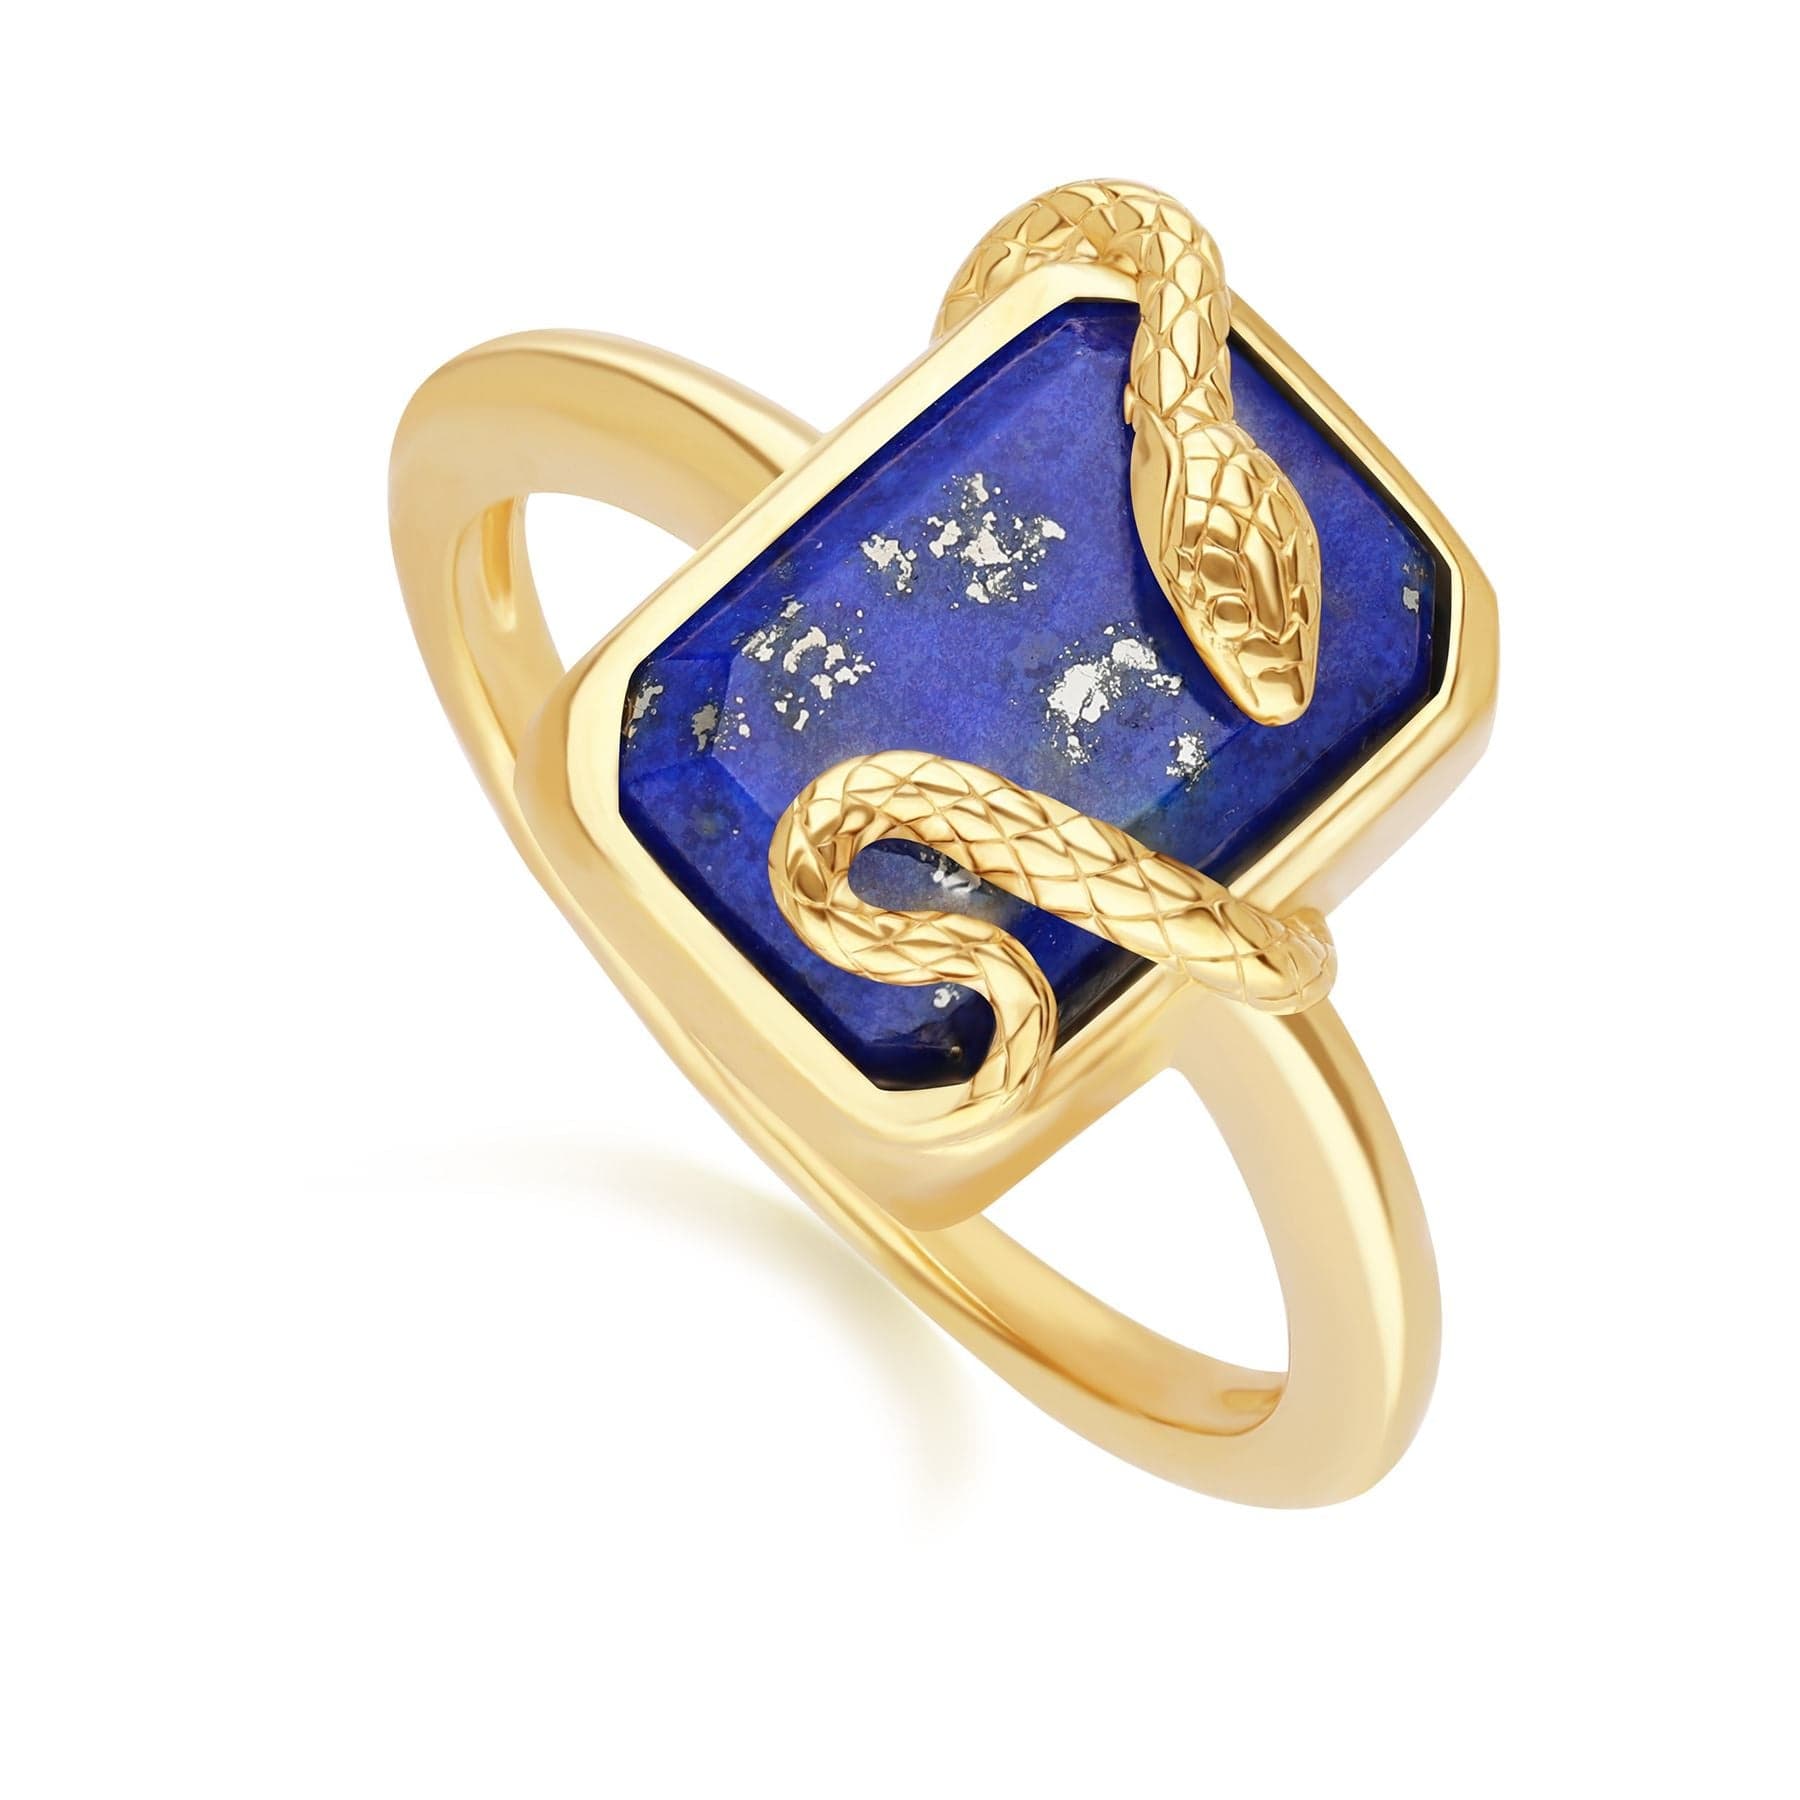 Grand Deco Lapis Lazuli Snake Wrap Ring in Gold Plated Sterling Silver - Gemondo